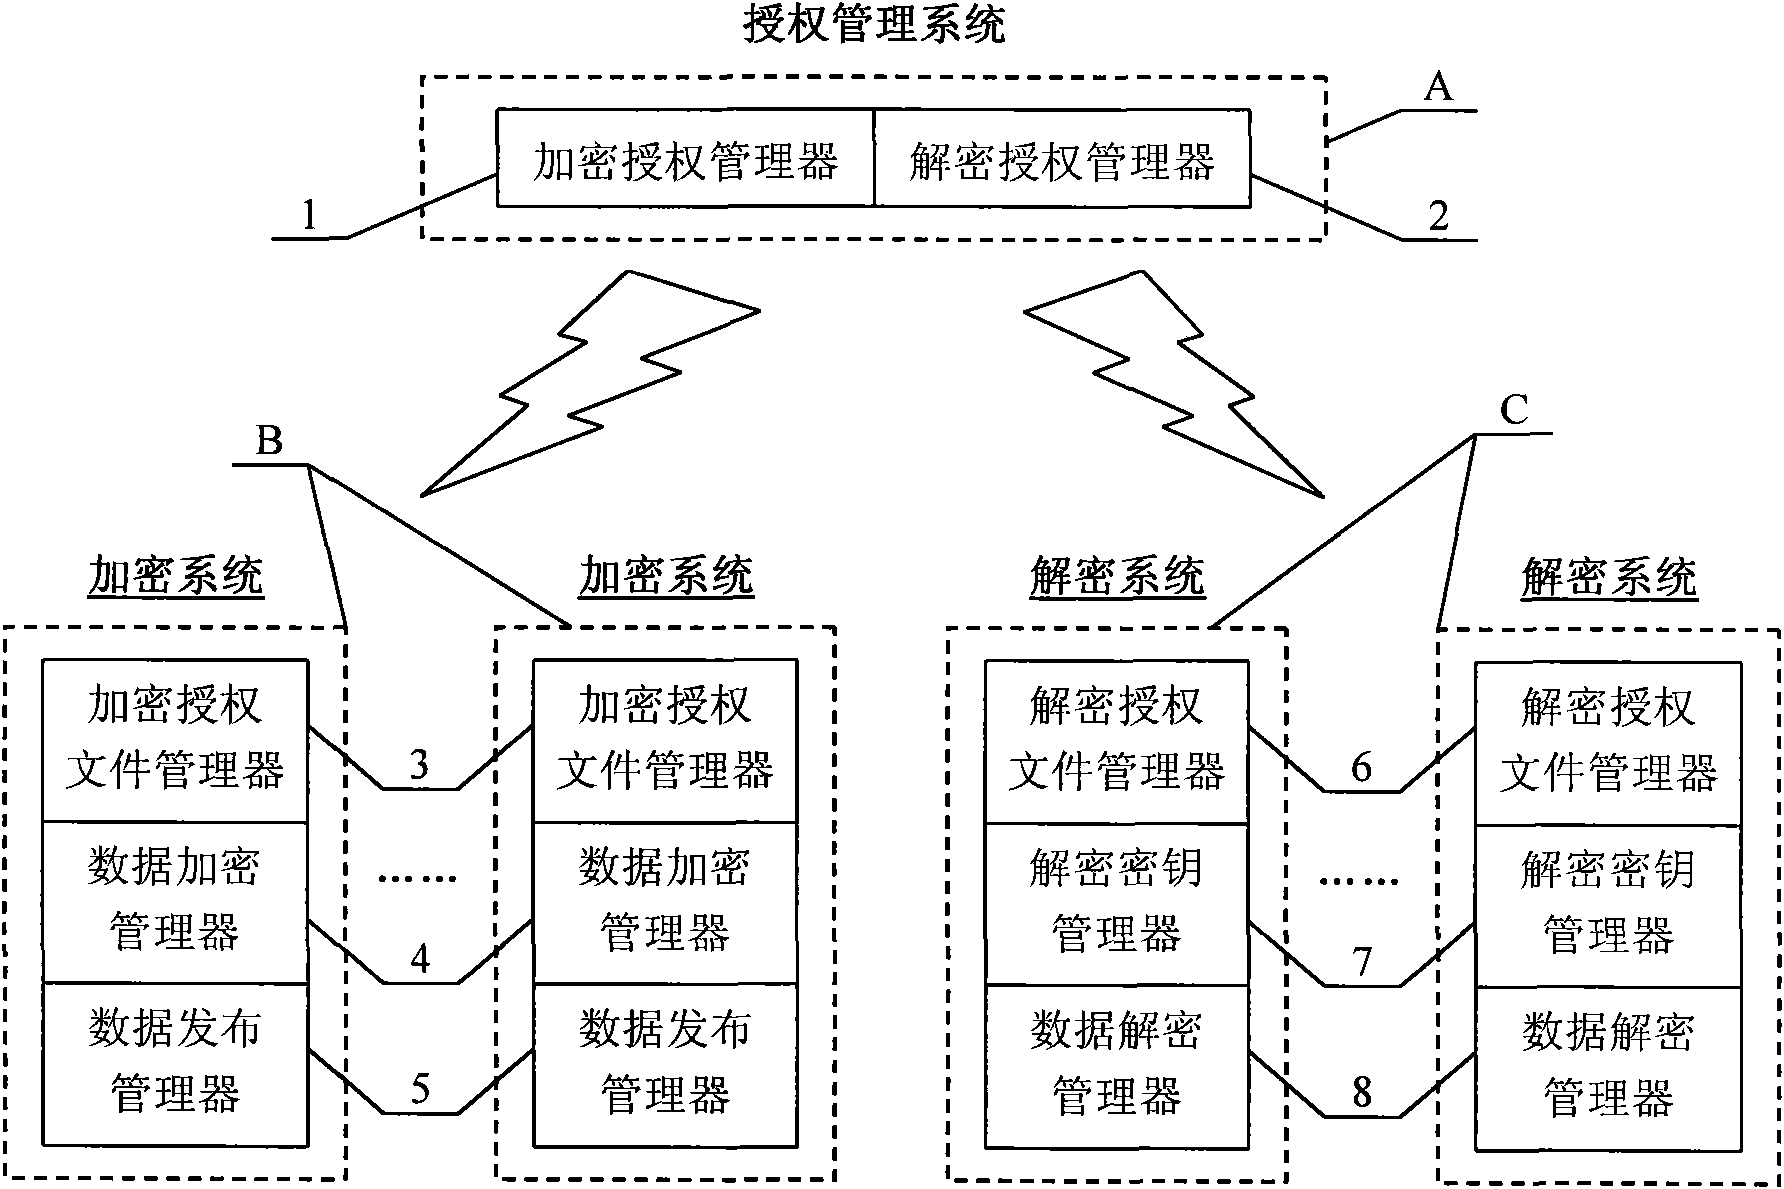 Information protection method and management system thereof for unconnected system